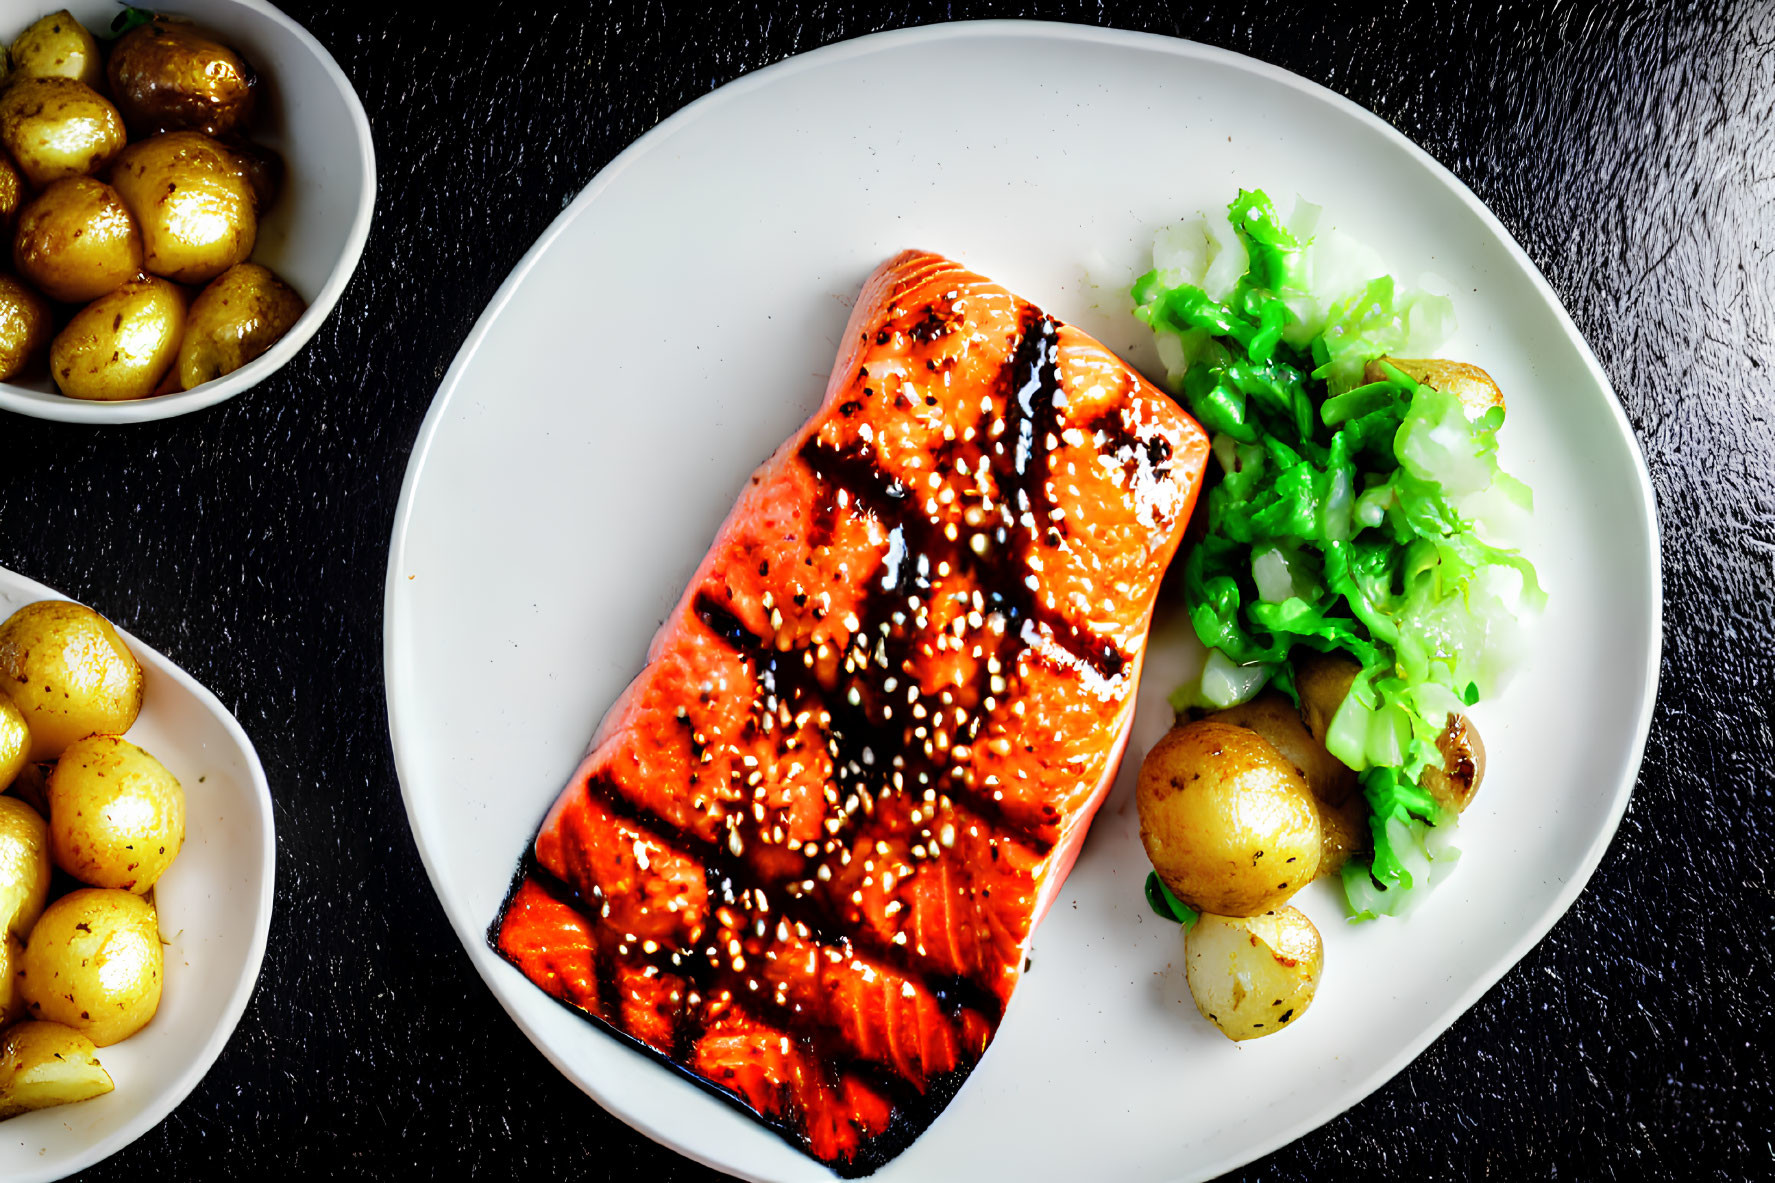 Grilled Salmon Fillet with Sesame Seeds and Roasted Potatoes on White Plate